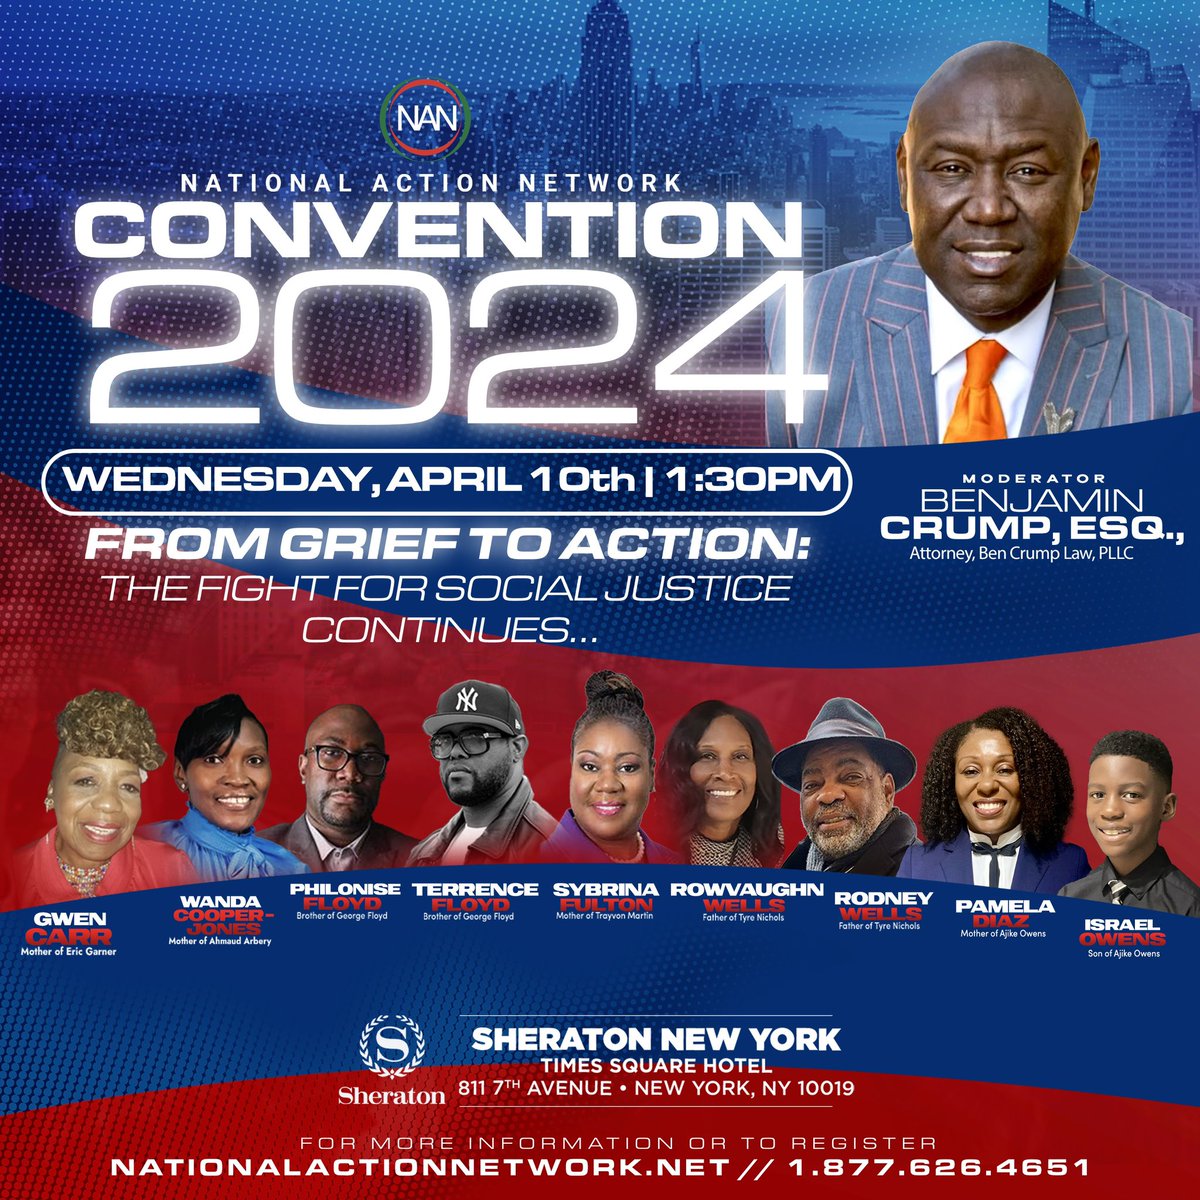 The National Action Network (NAN) 2024 Convention, begins tomorrow, April 10th in the heart of New York City. Join us Wednesday for the FROM GRIEF TO ACTION: THE FIGHT FOR SOCIAL JUSTICE CONTINUES panel 📅 April 10, 2024 ⏰1:30 pm ET NANCONVENTION2024.com #NANCONV2024